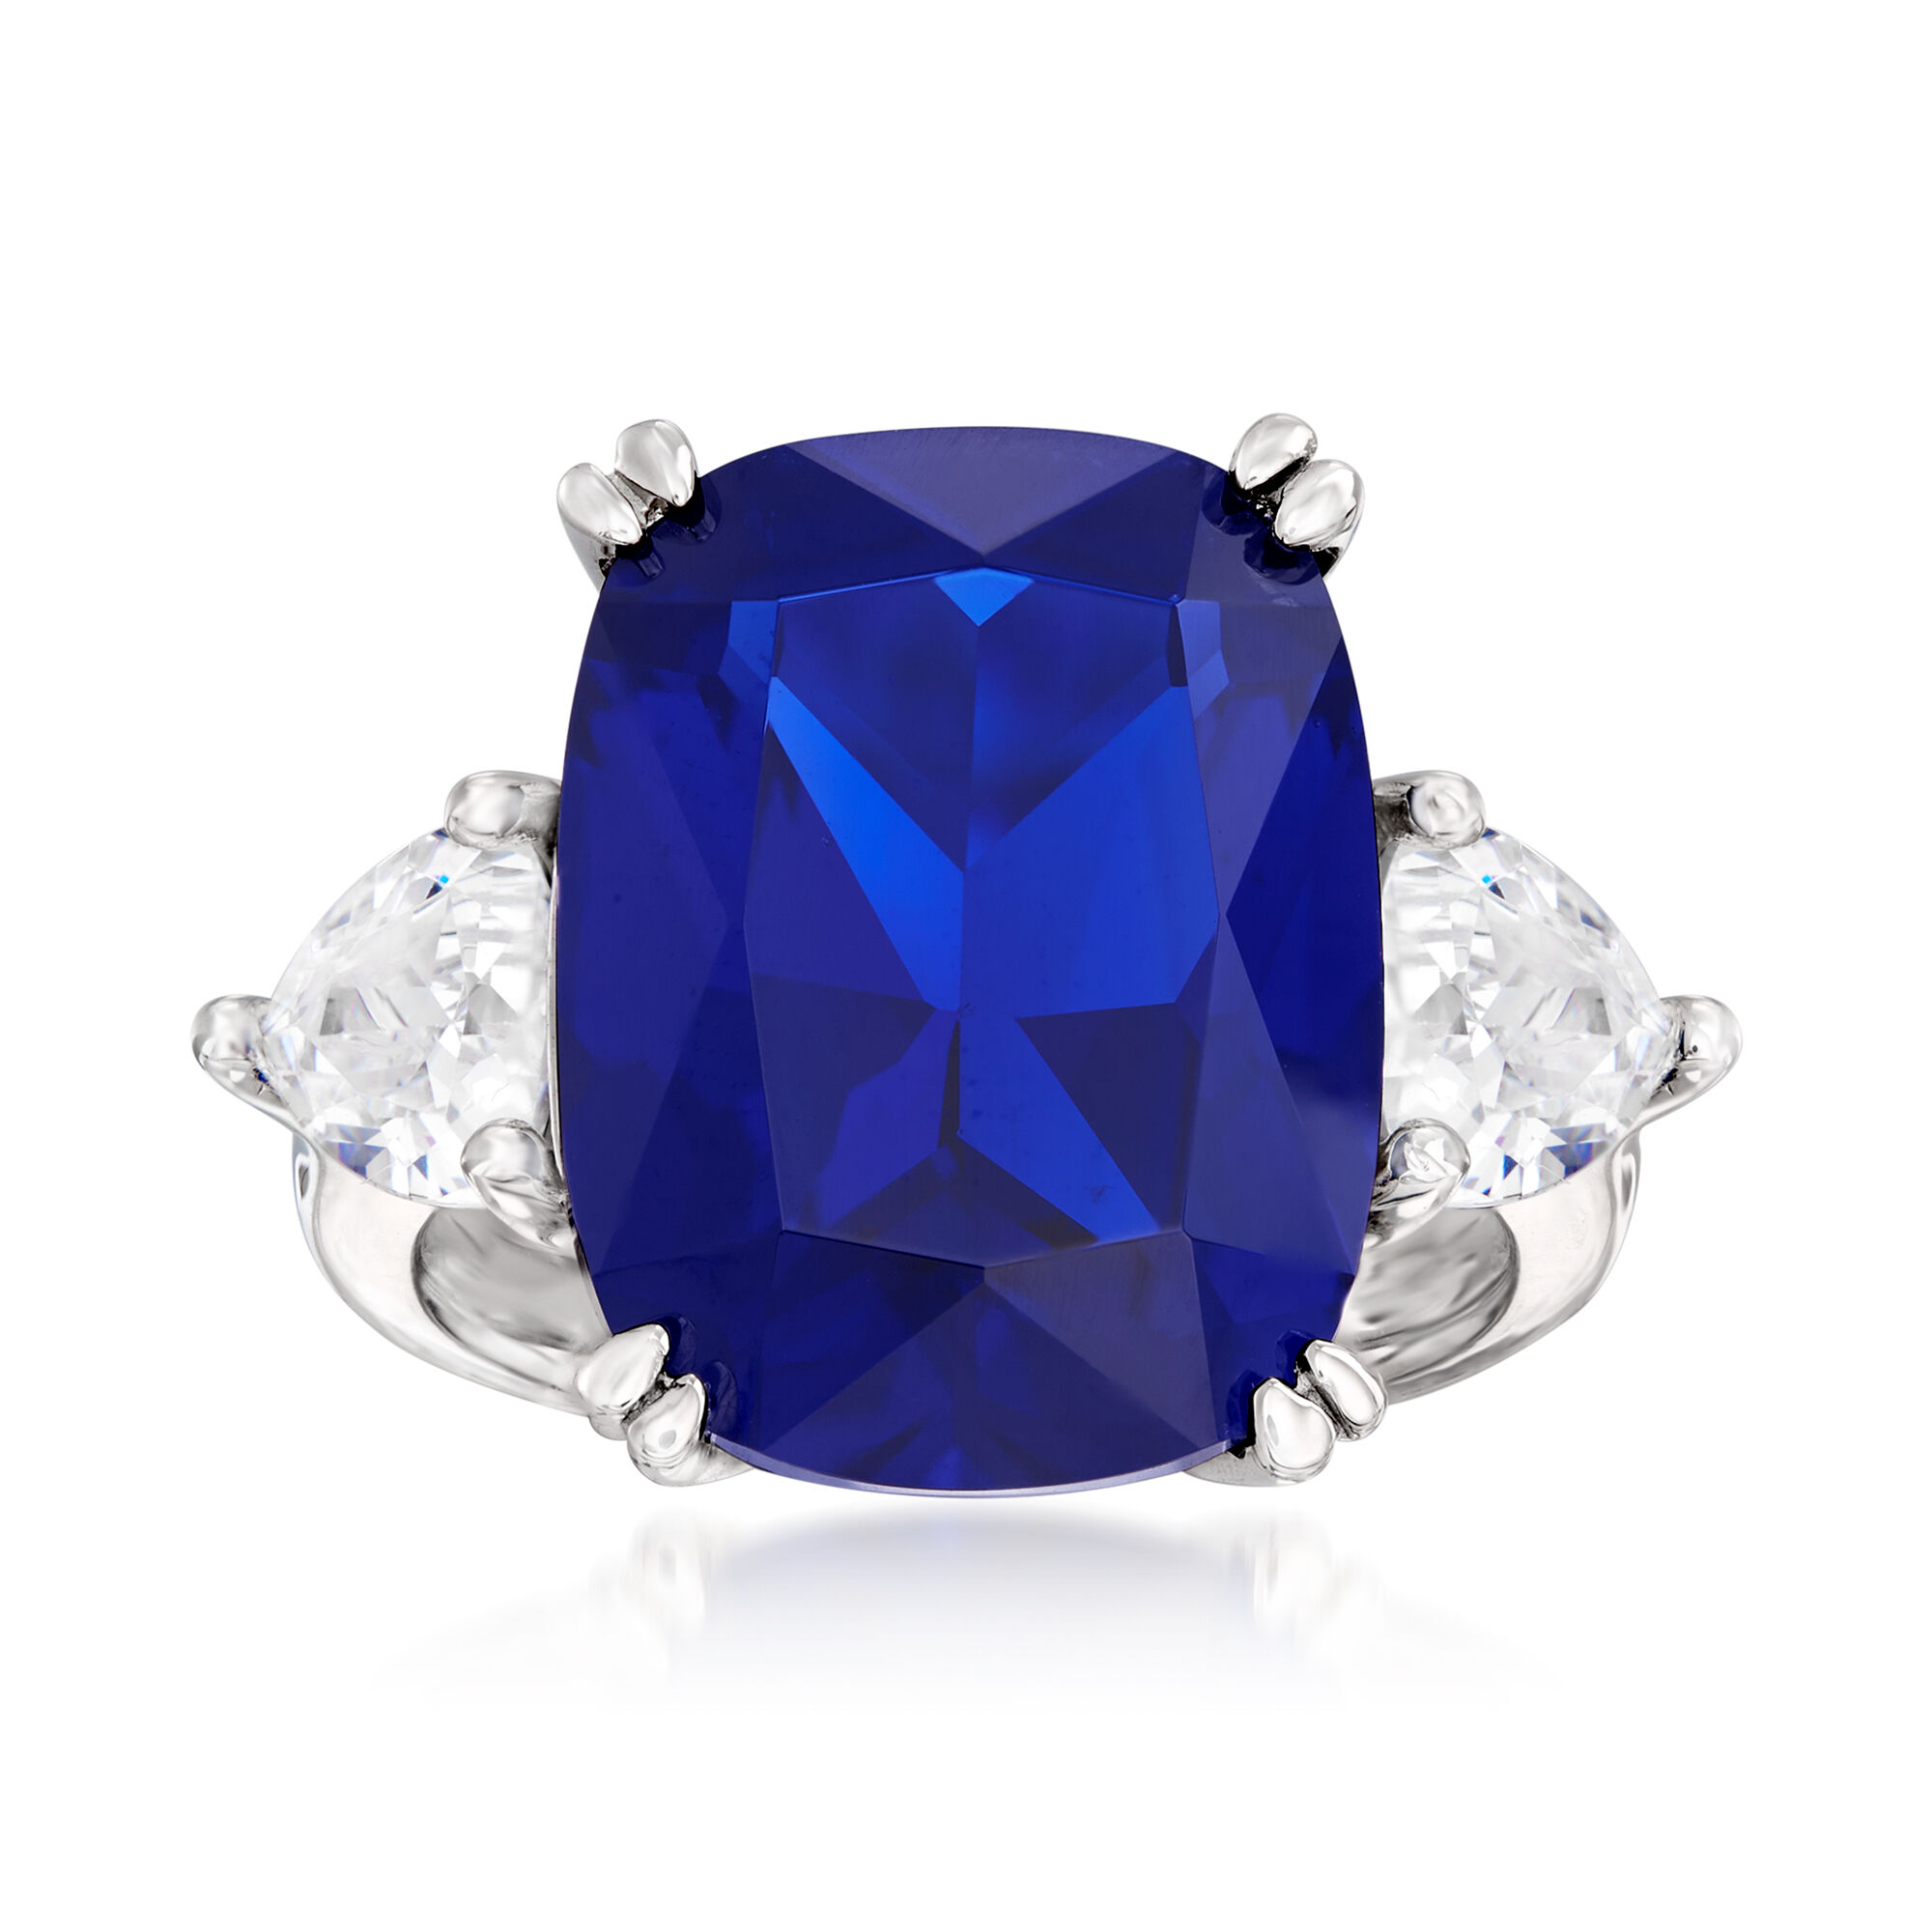 12.25 Carat Cushion-Cut Simulated Sapphire and 1.75 ct. t.w. CZ